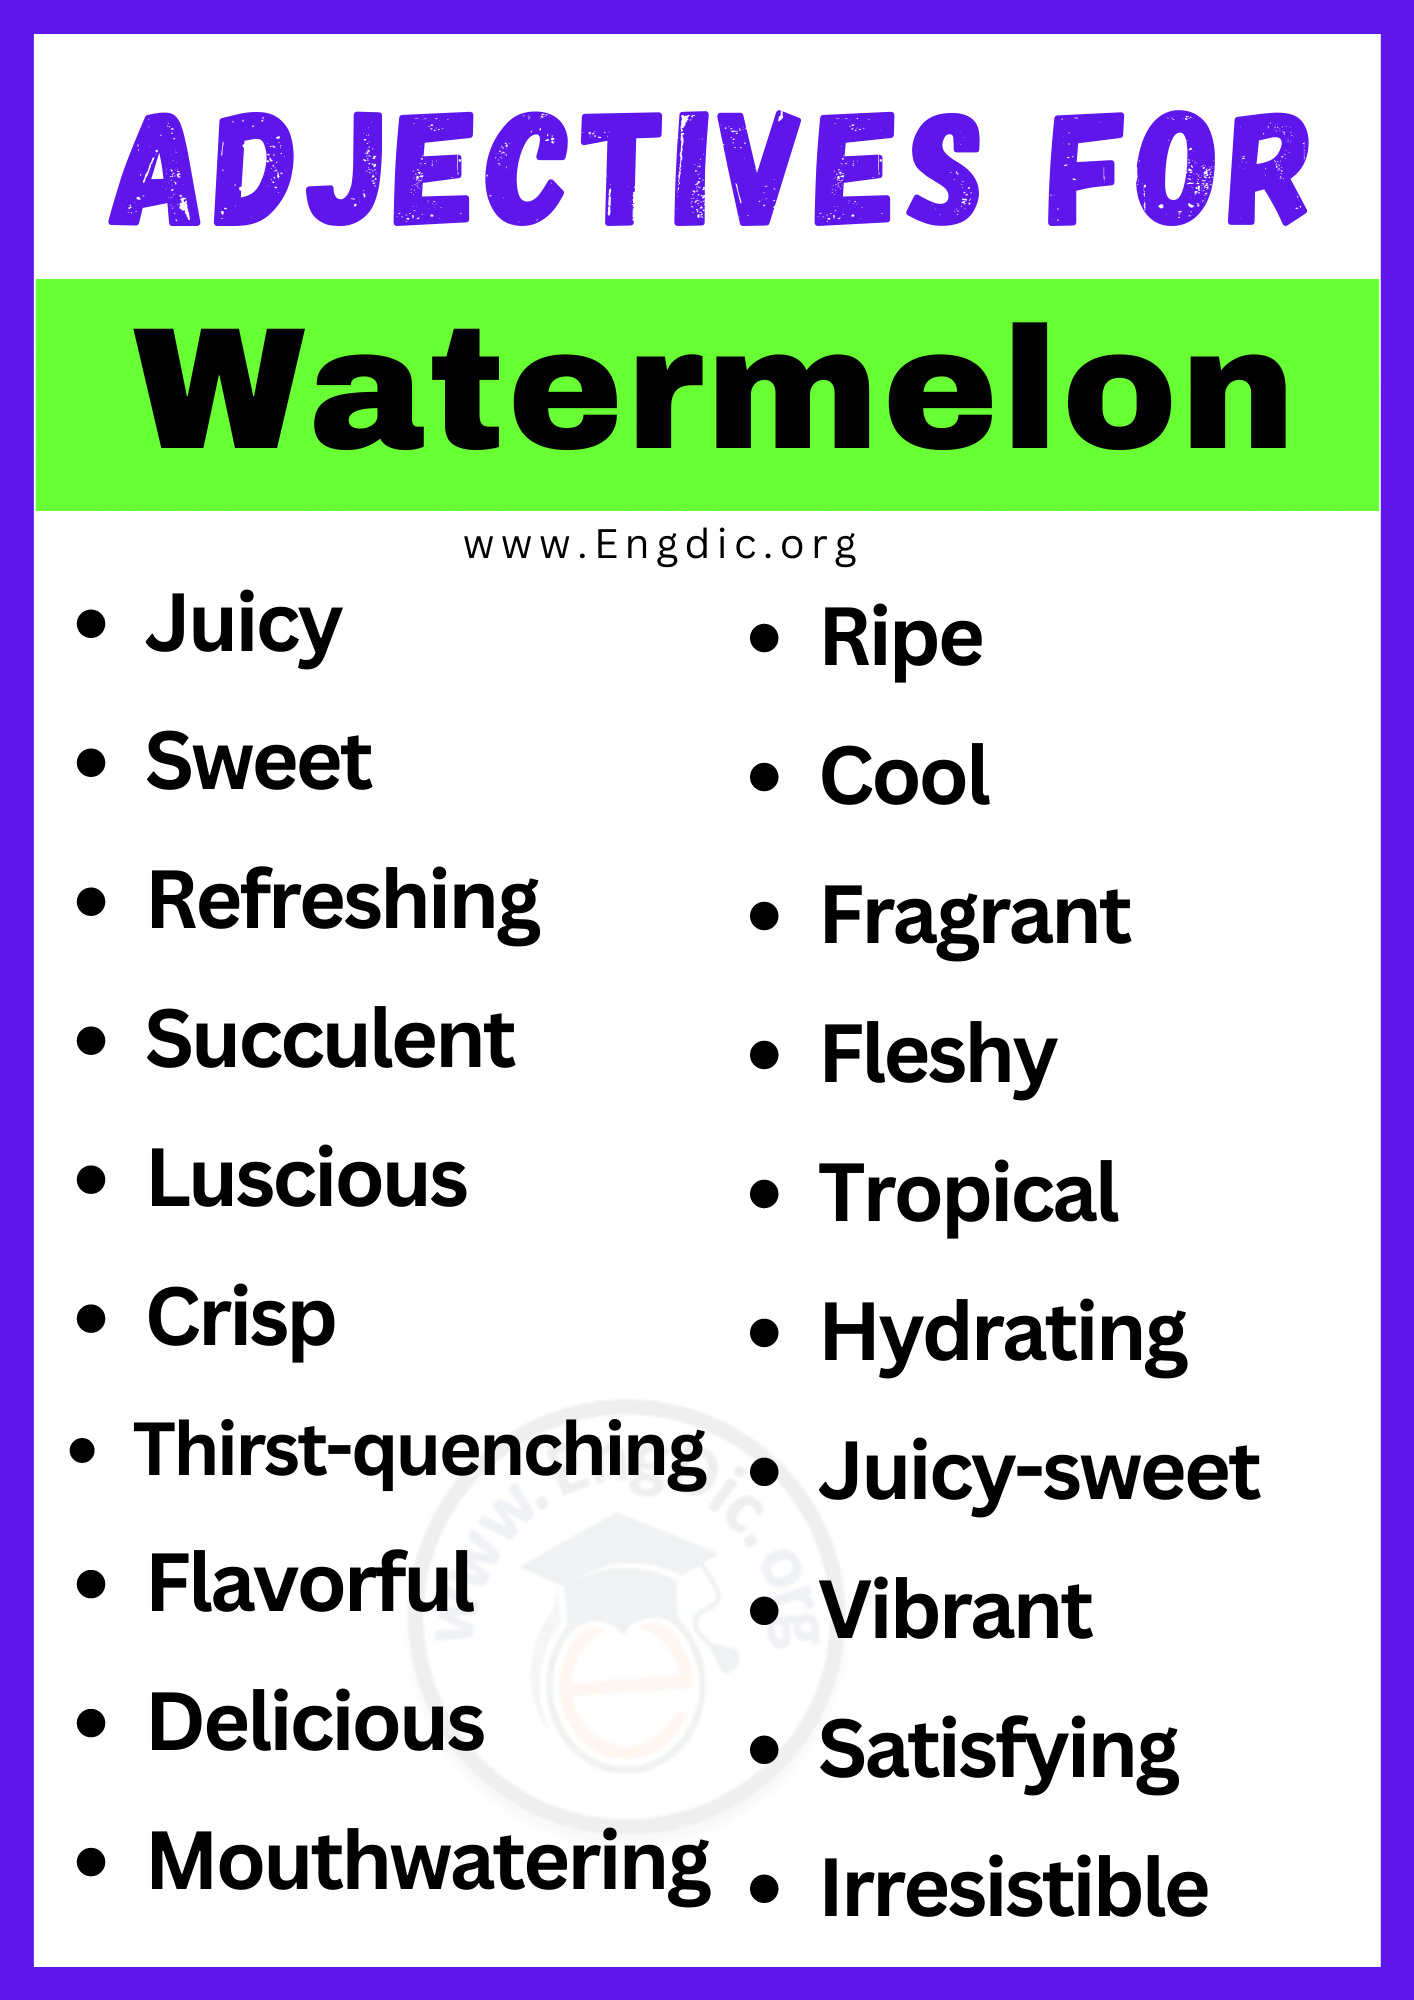 Adjectives for Watermelonfor Waves